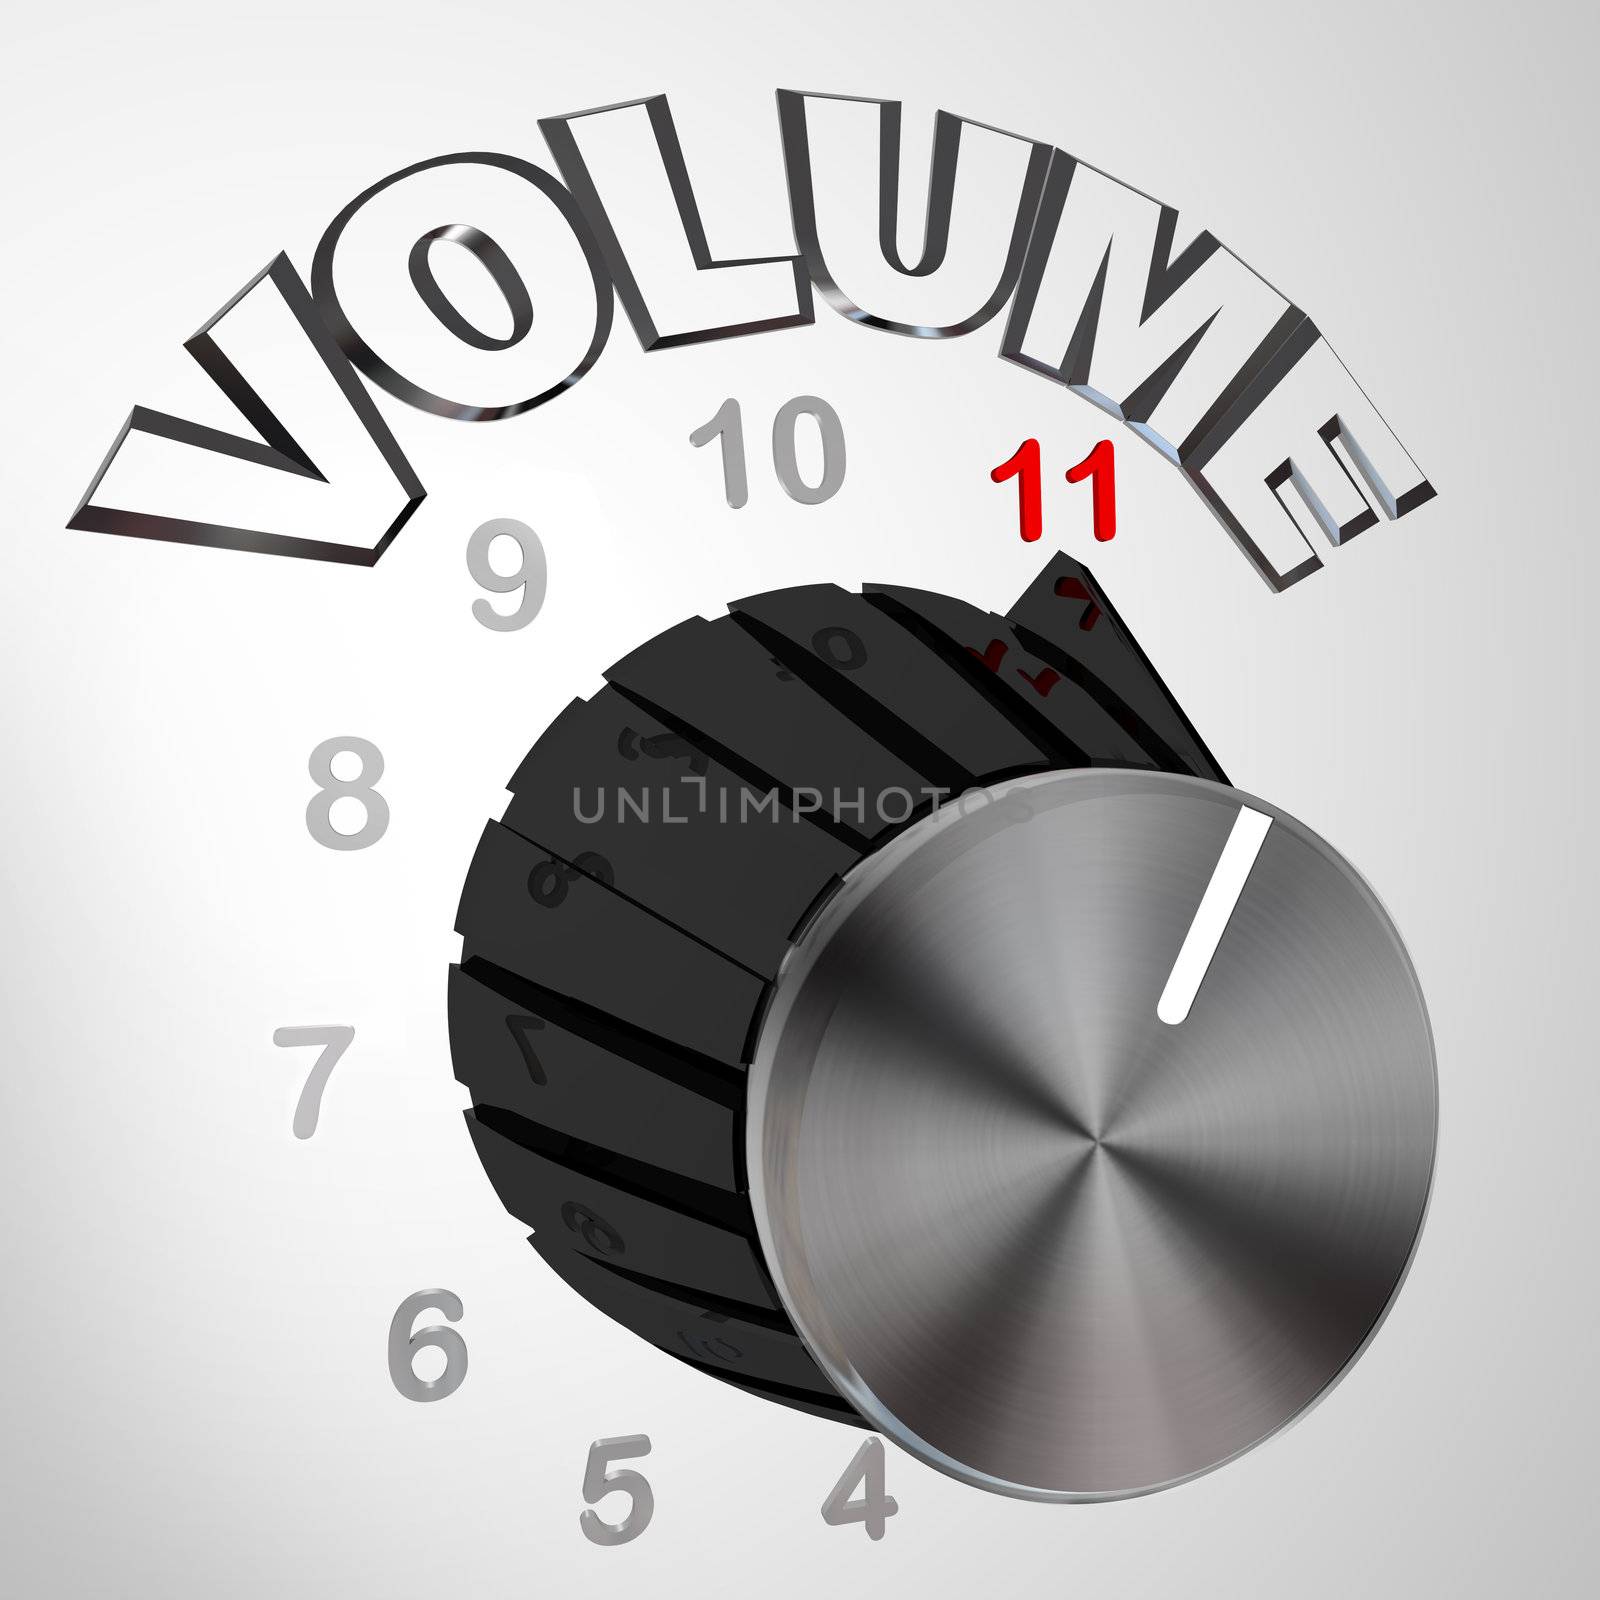 This One Goes to 11 - Volume Dial Knob Turned to Max by iQoncept